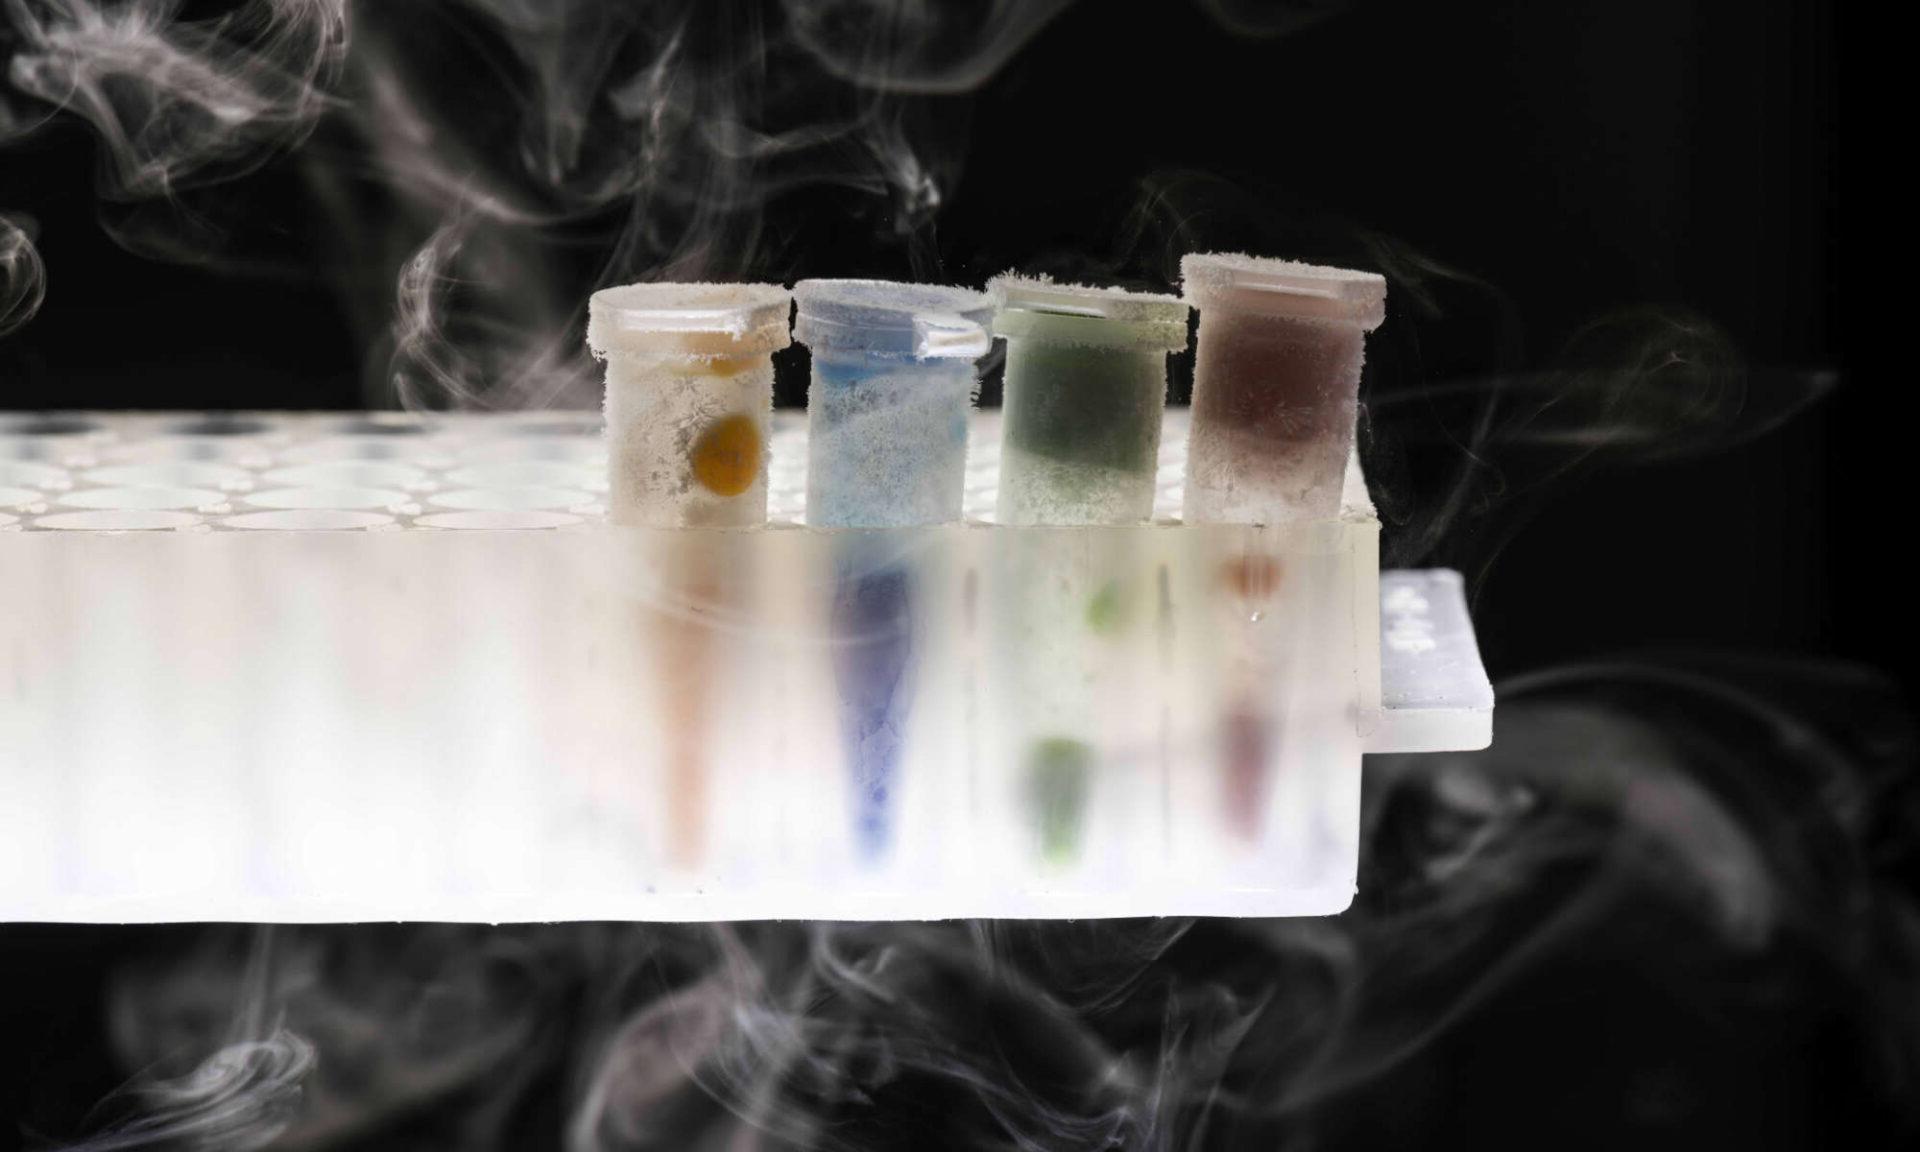 Four tubes, each a different color, containing hydrogels frozen in liquid nitrogen and obtained via 3d bioprinting.